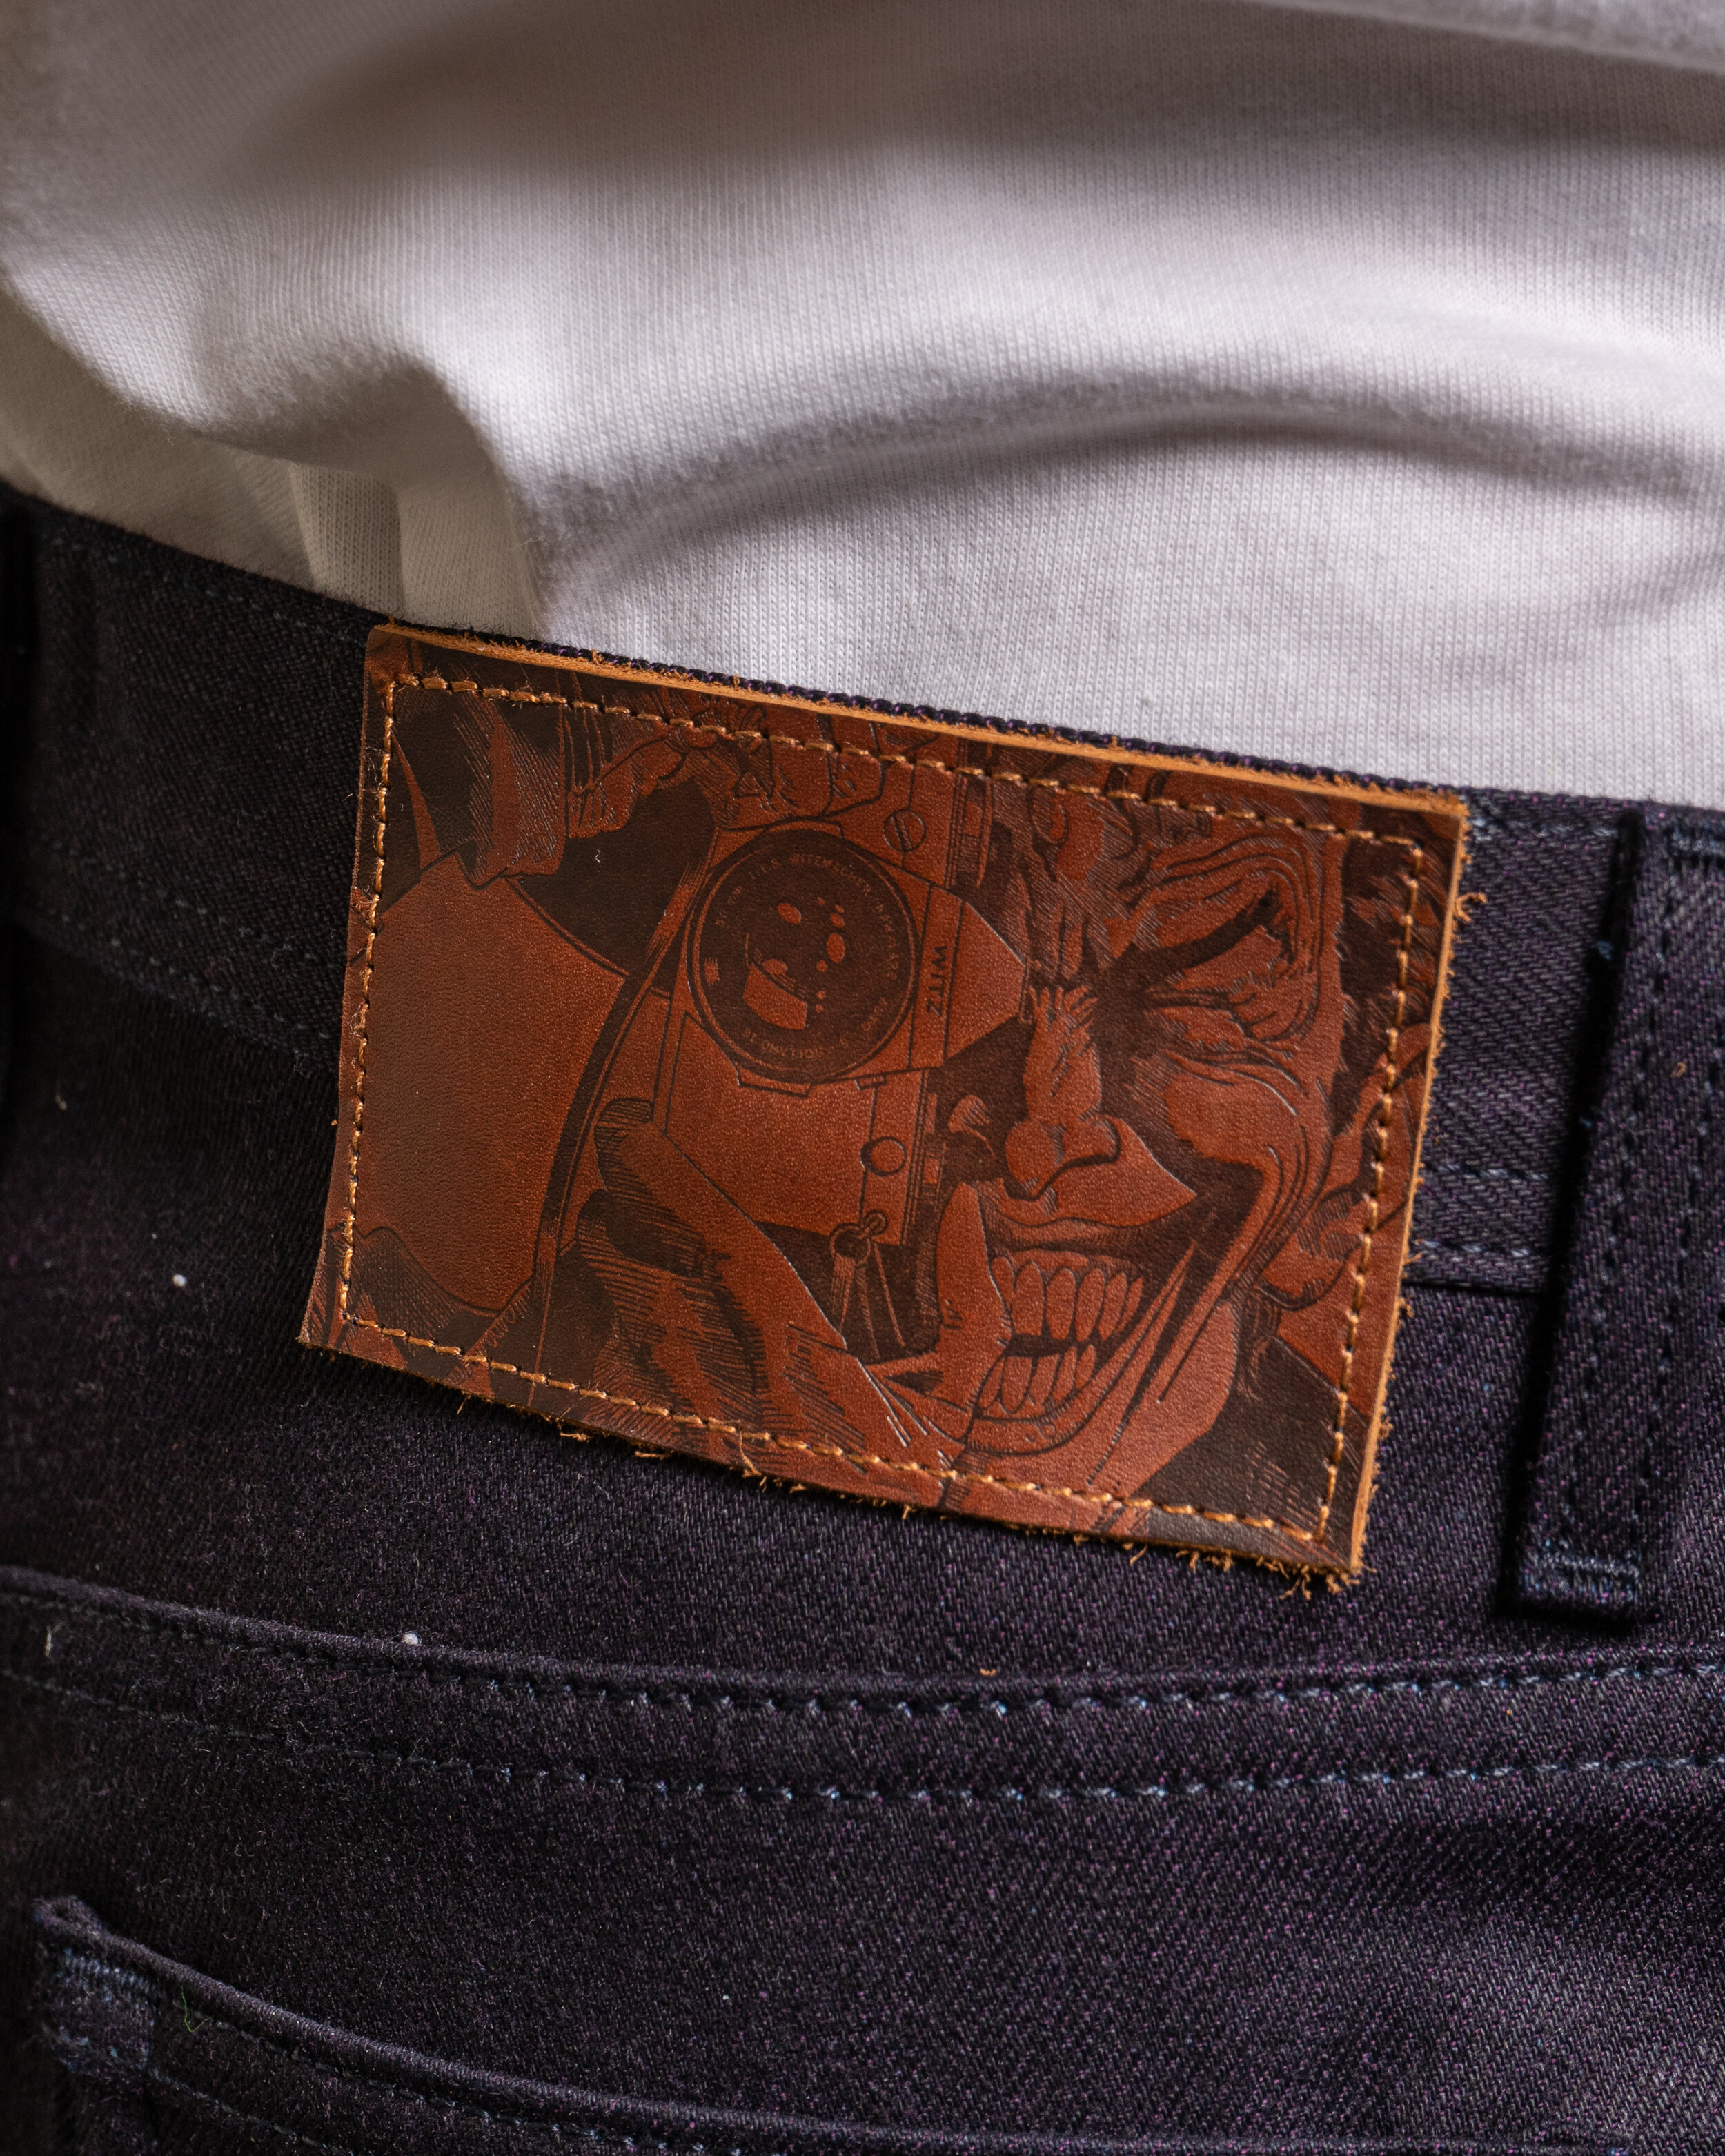 The Joker Clown Price Of Crime Selvedge - Leather Patch